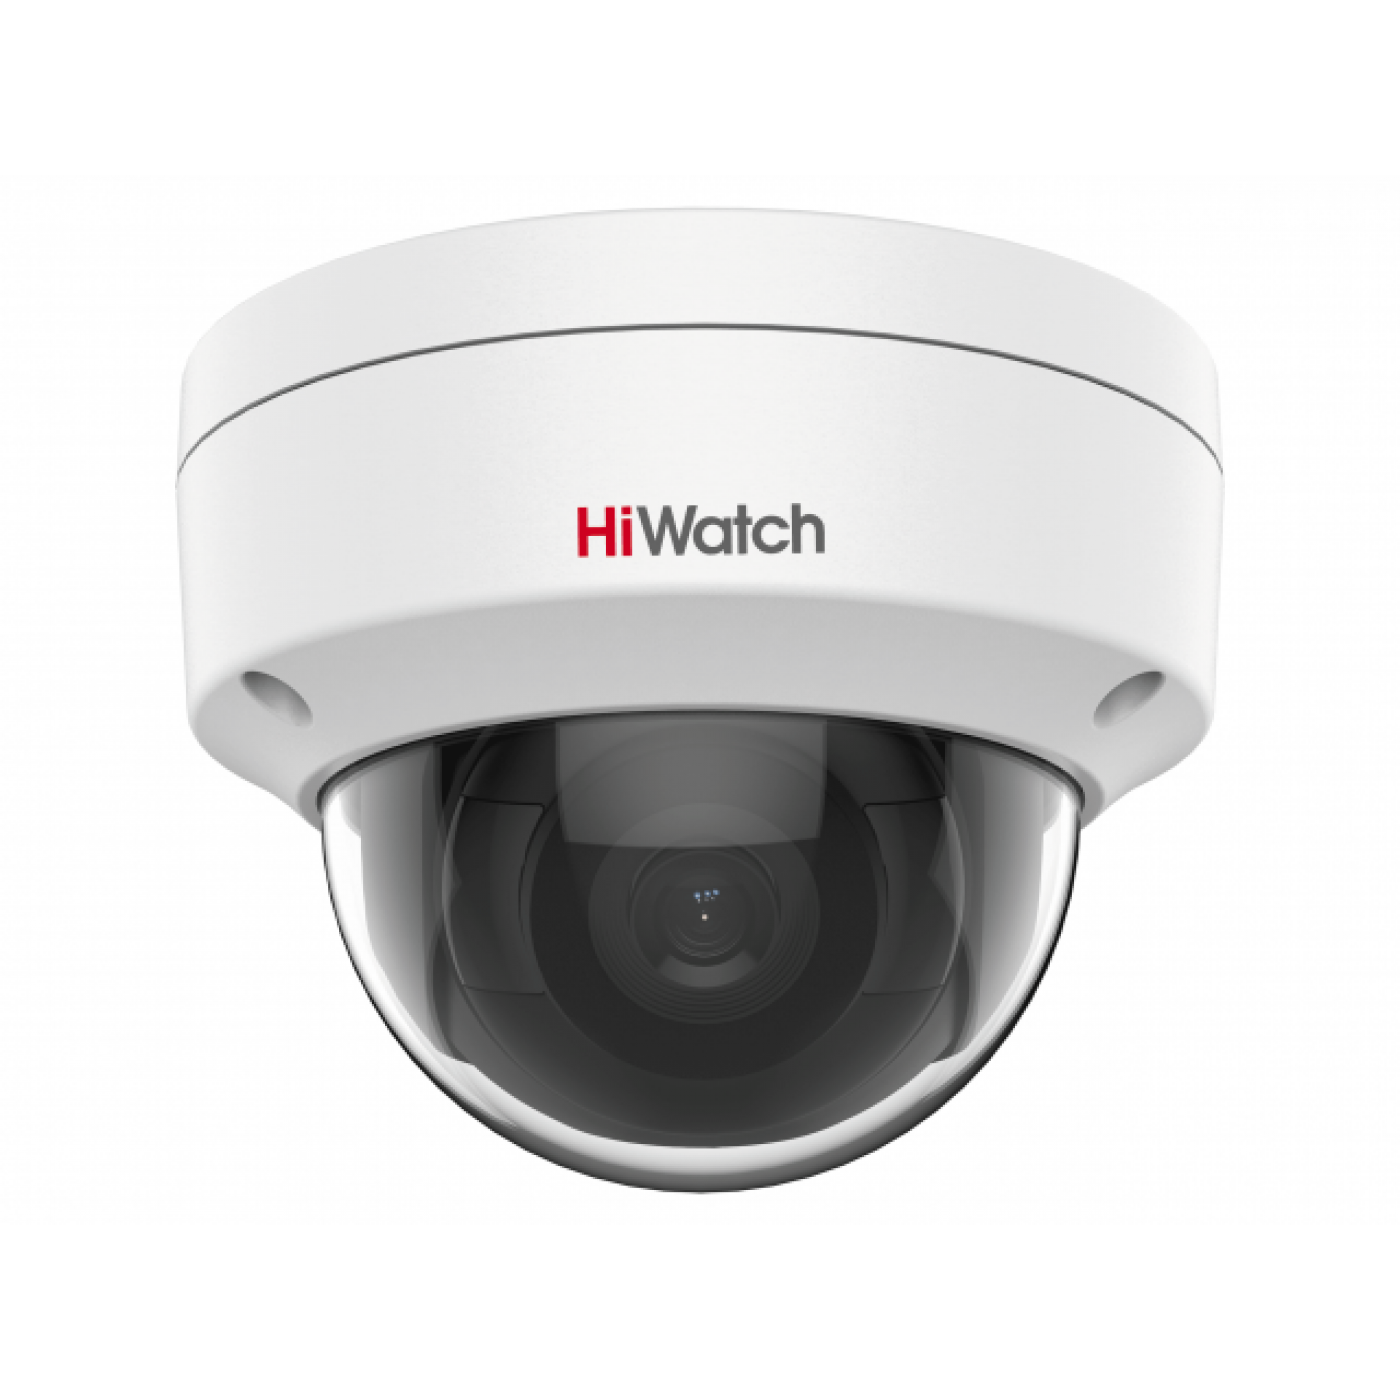 HiWatch DS-I402(C) (2.8 mm)